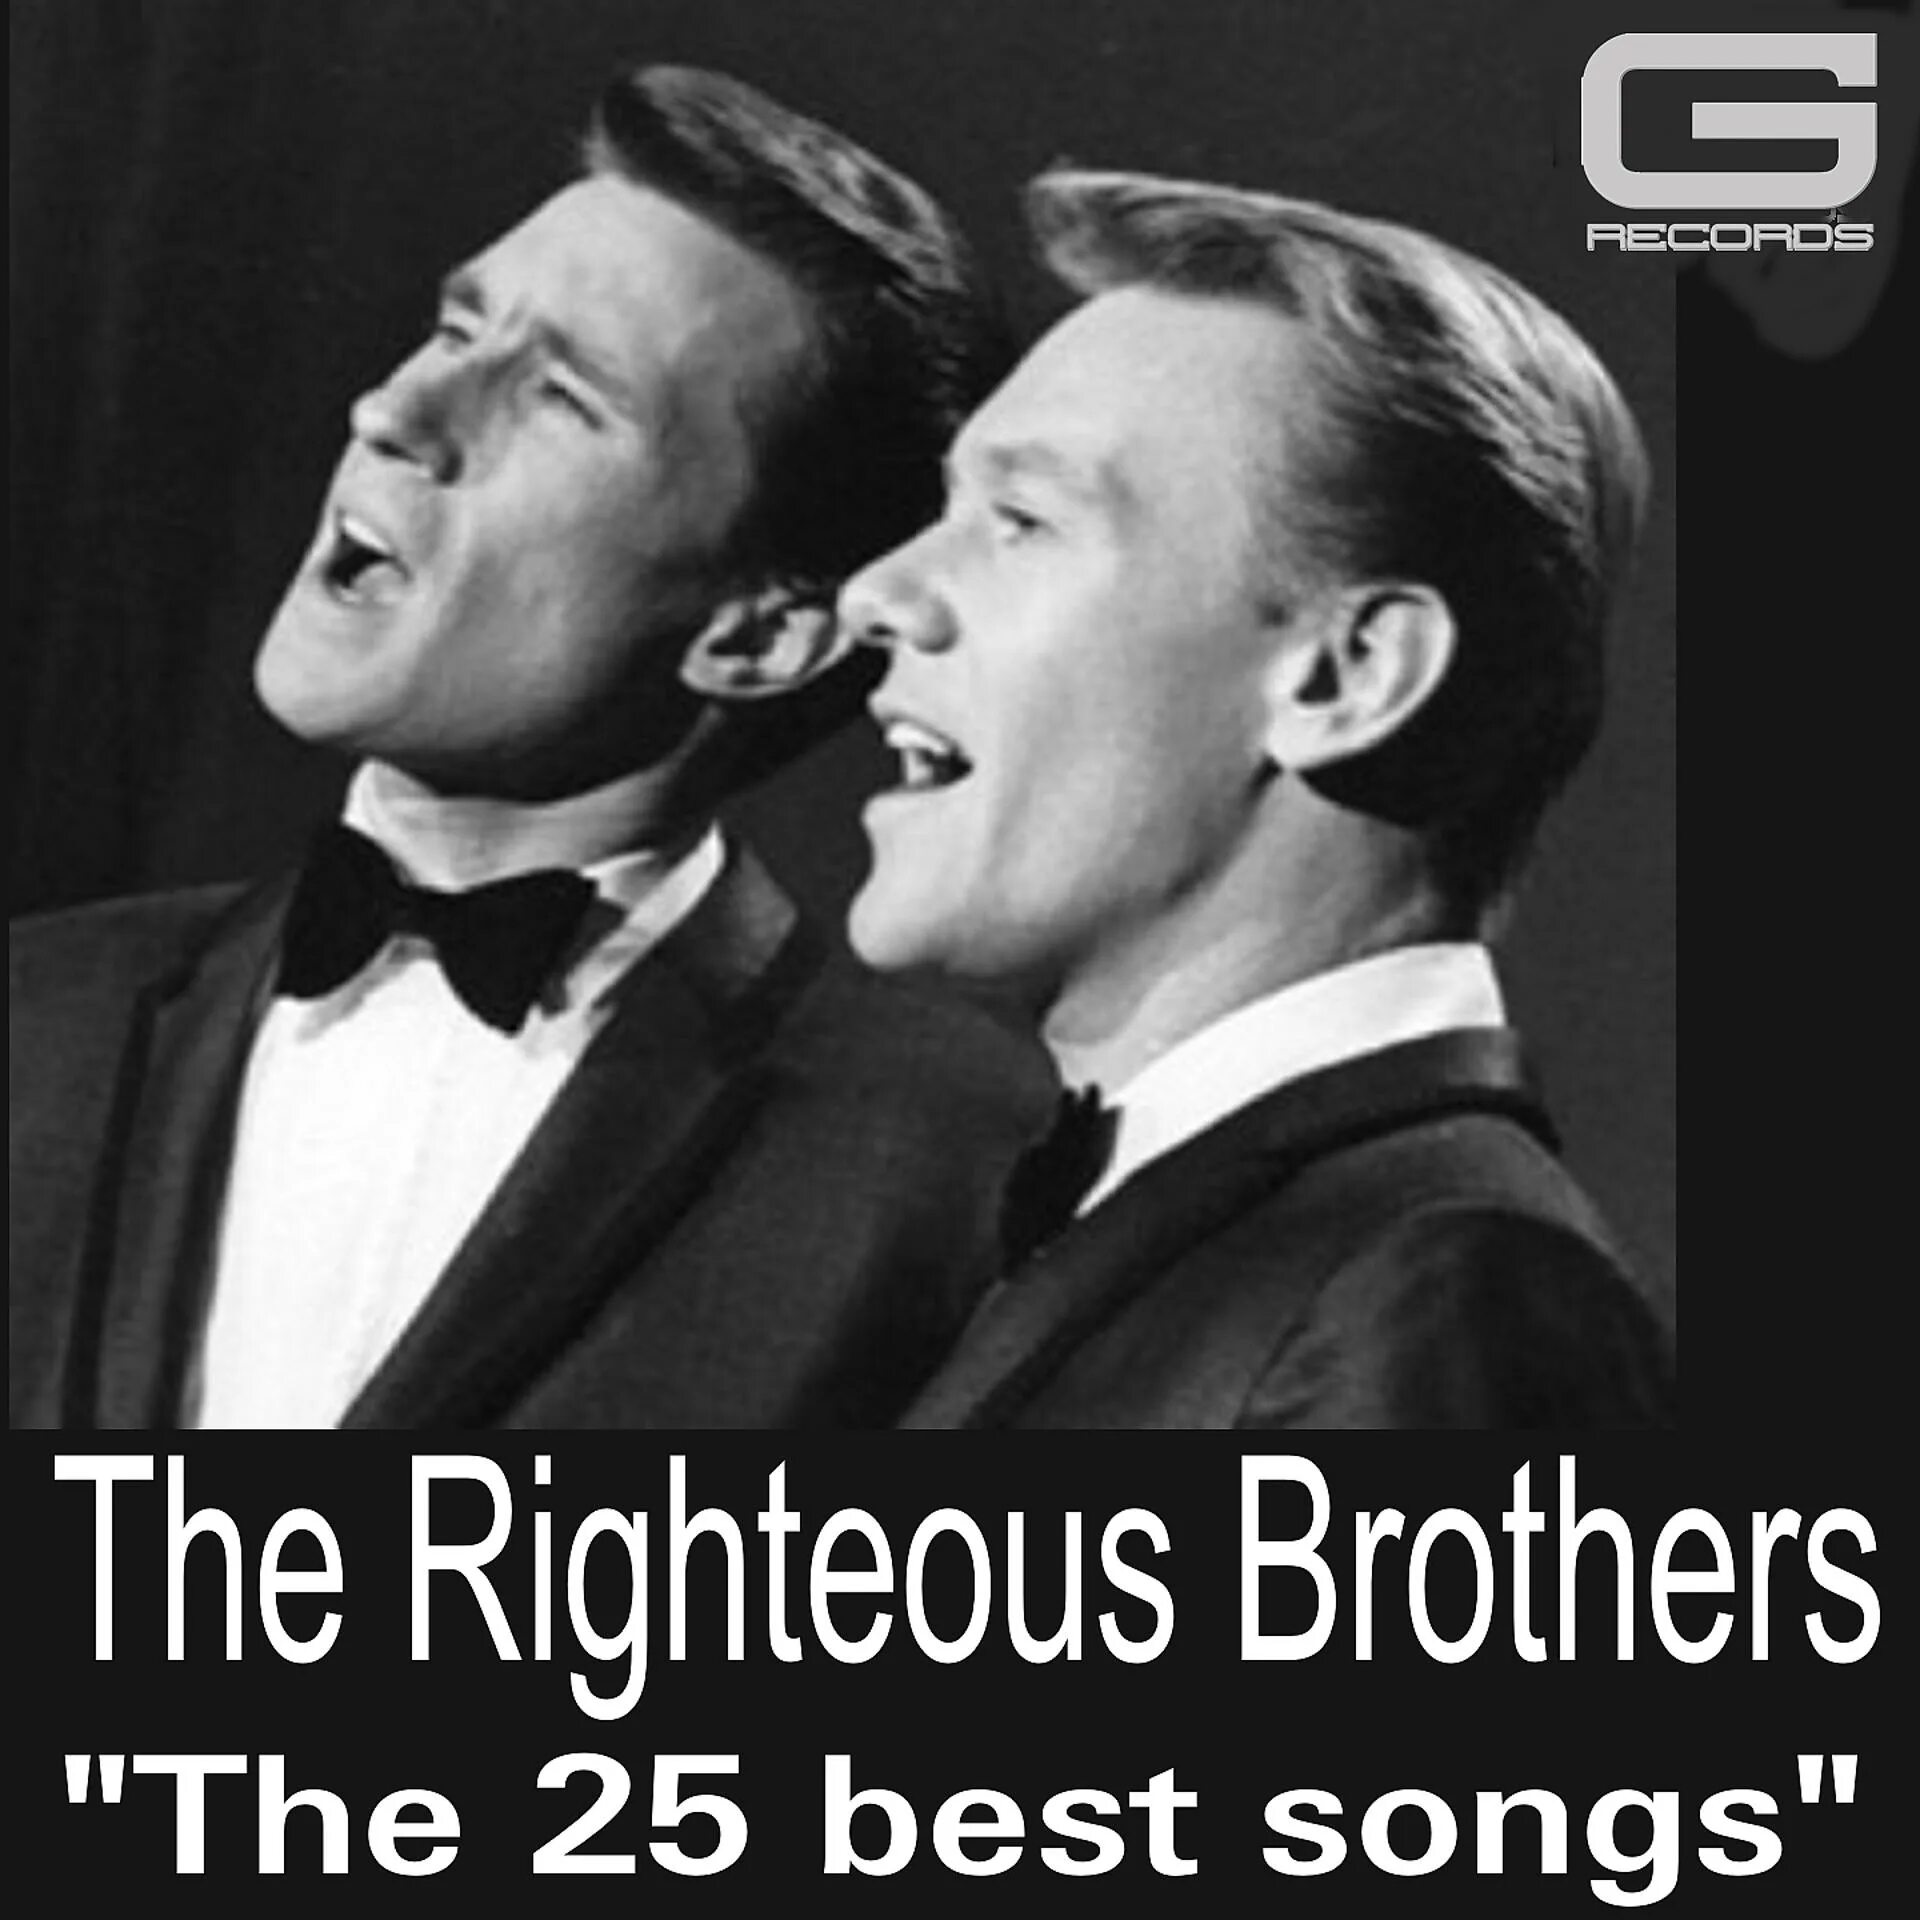 The righteous brothers unchained melody. The Righteous brothers. Brothers the Righteous brothers.